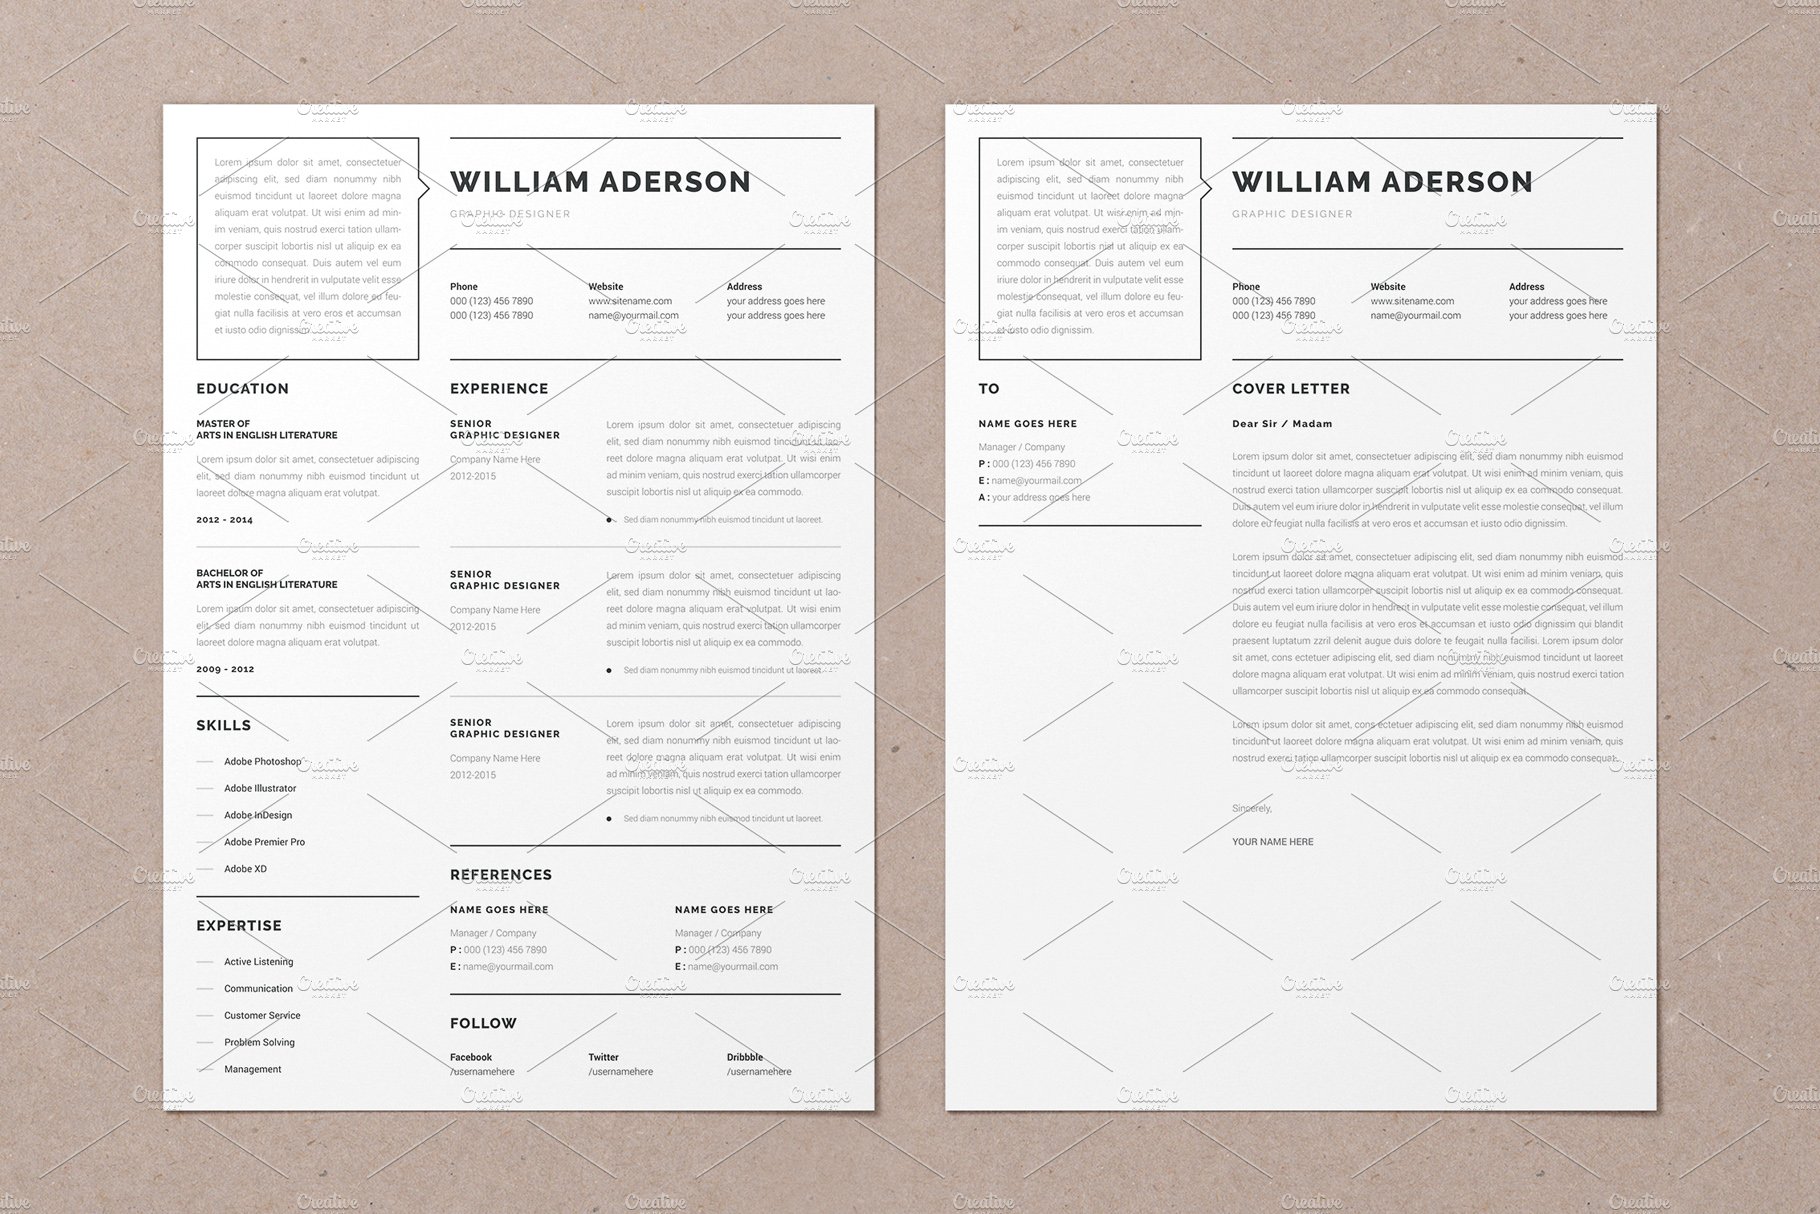 Google docs Resume Template preview image.